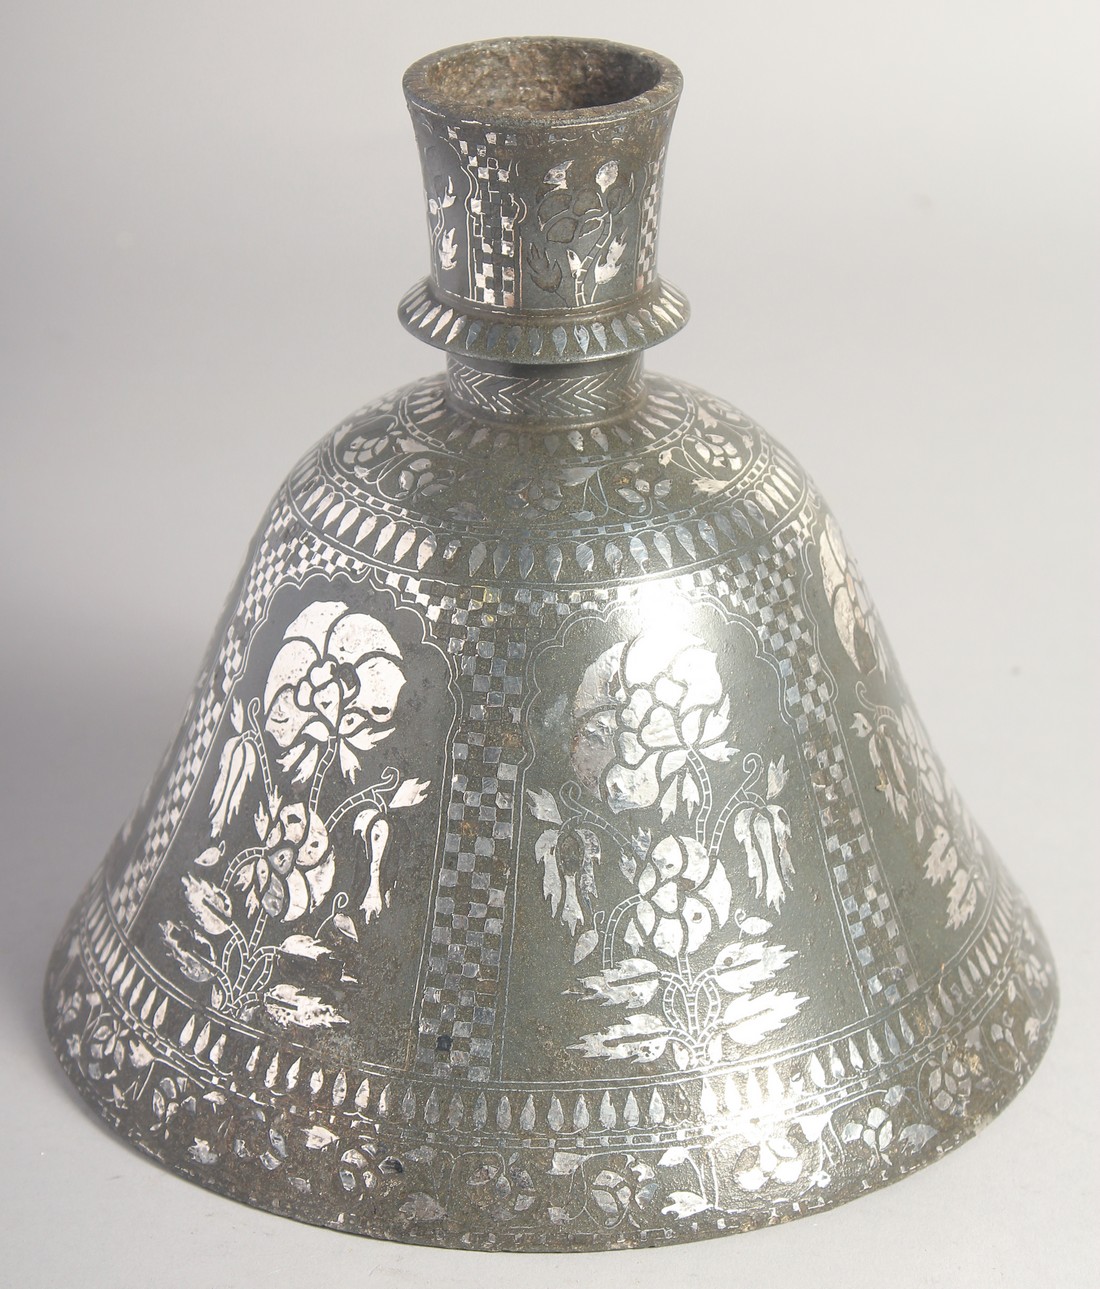 A LARGE 18TH CENTURY INDIAN BIDRI SILVER INLAID HUQQA BASE, with decorative floral panels. 20cm - Image 2 of 5